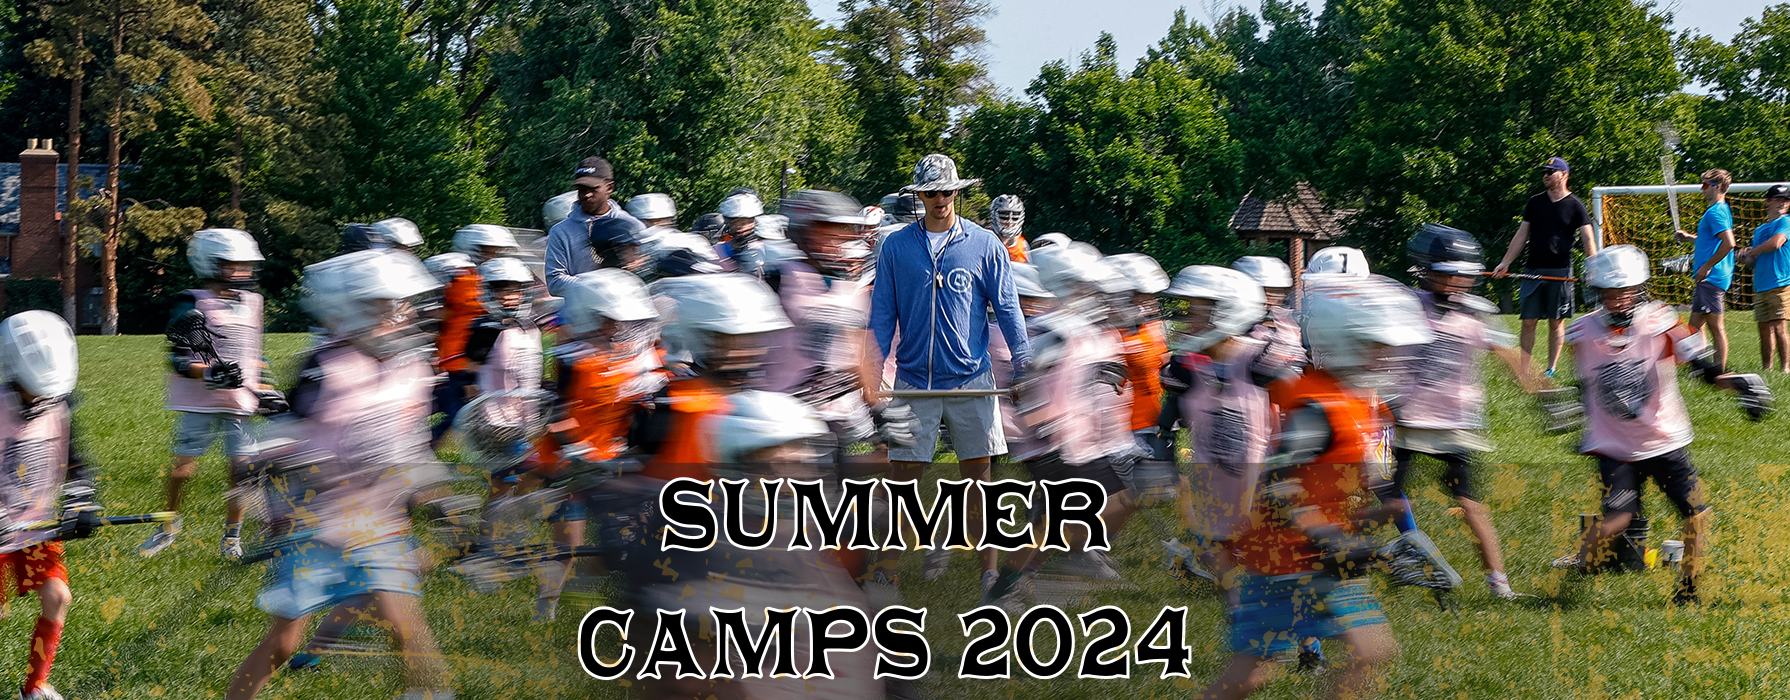 Camps 2024 Banner 7.png